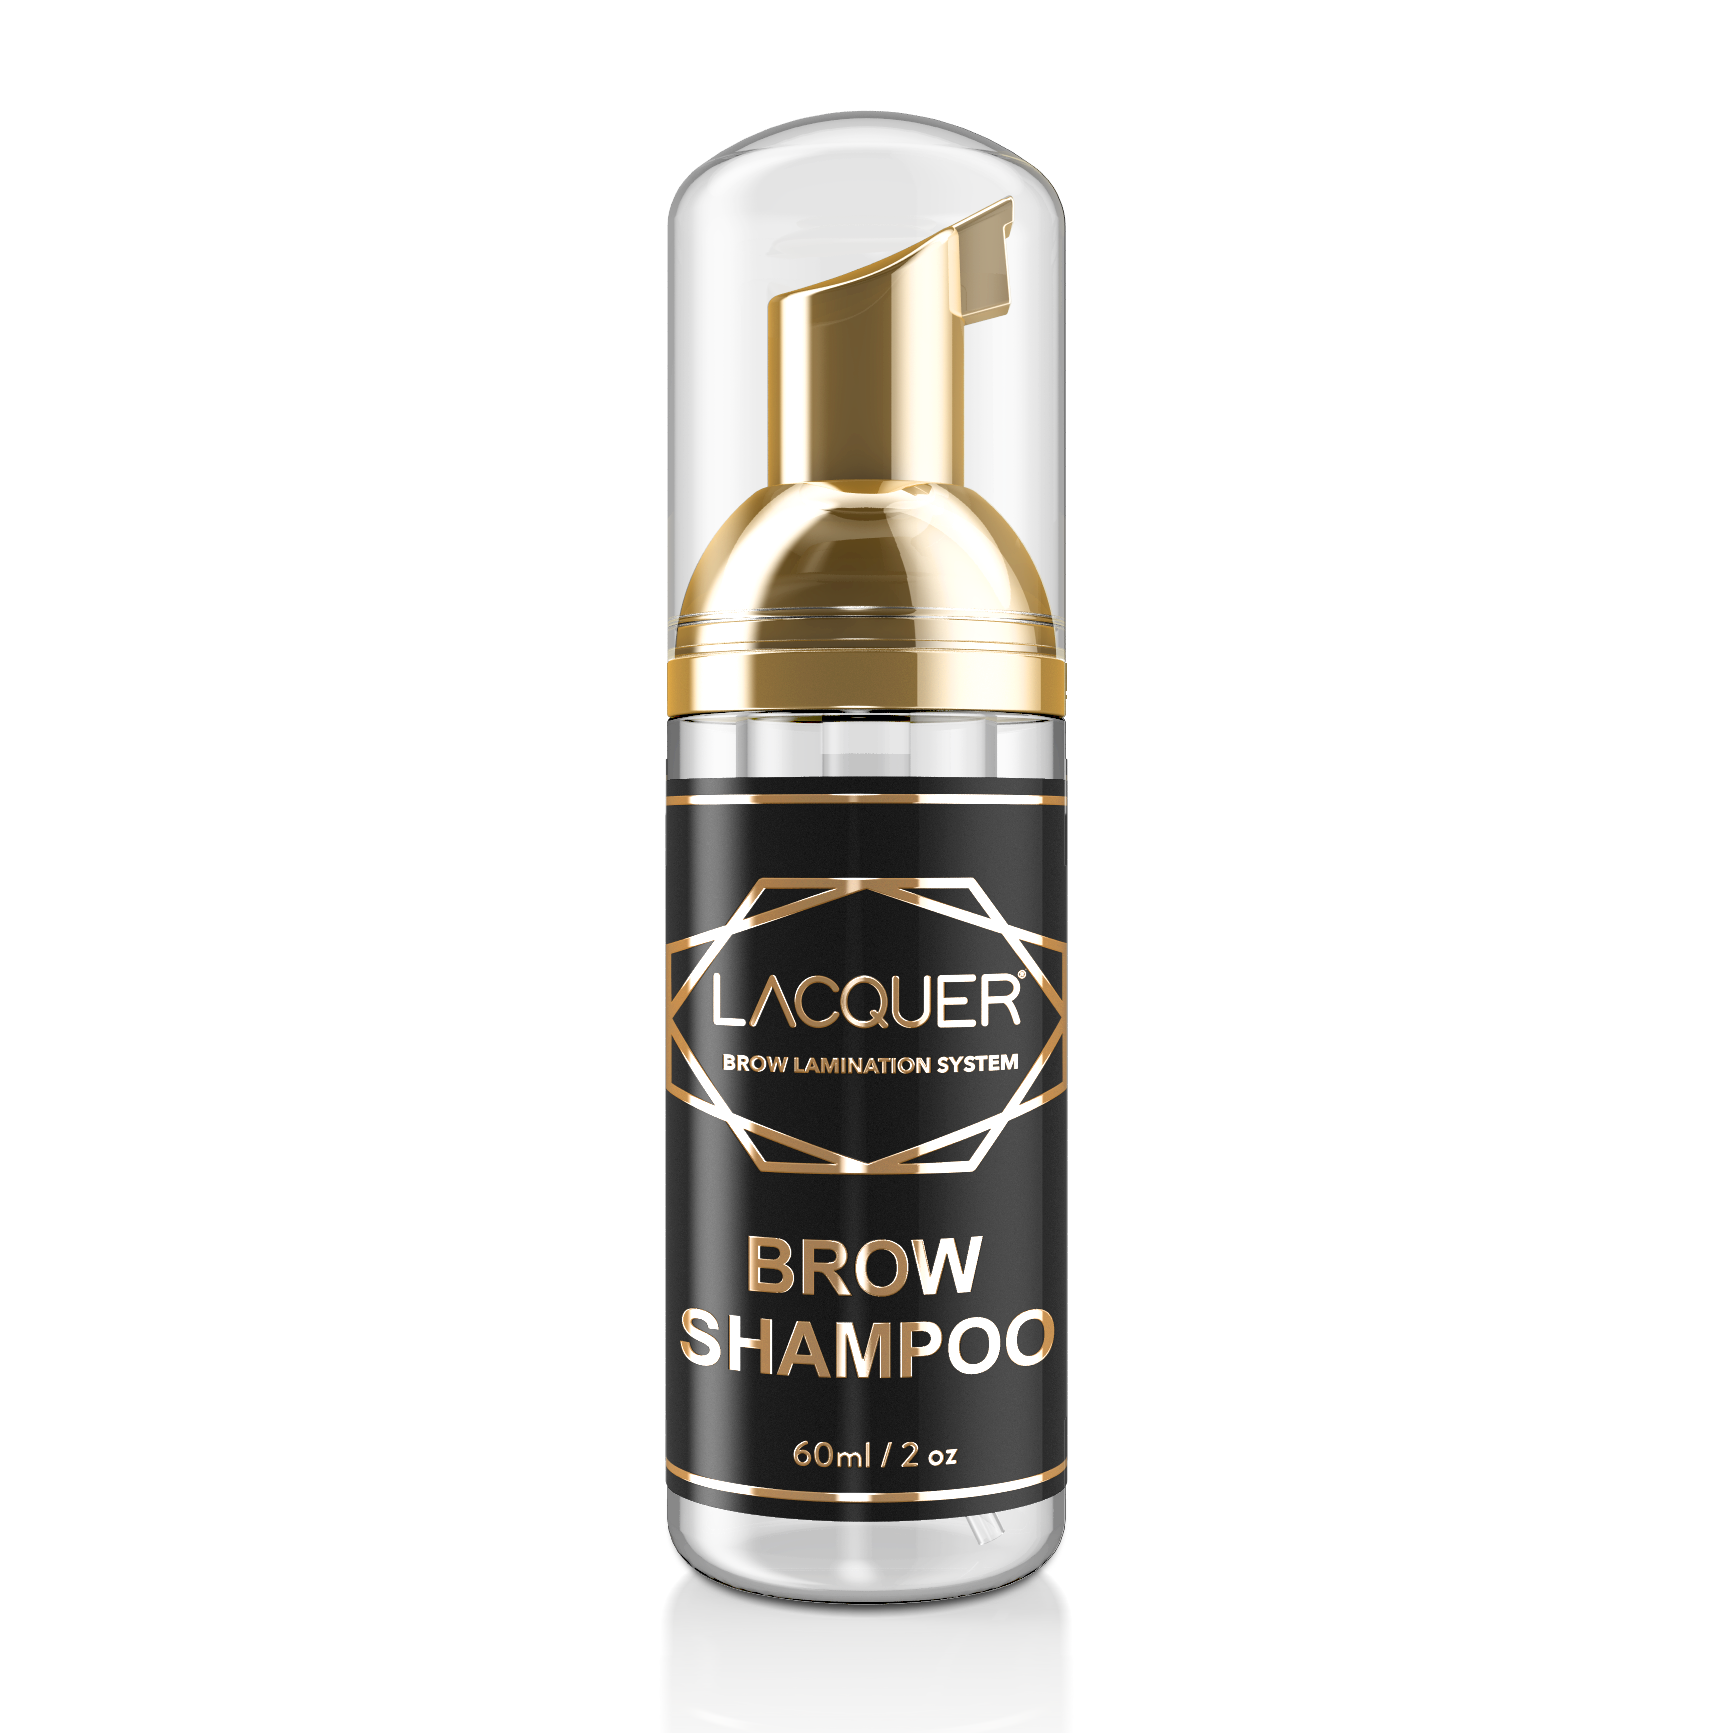 LACQUER® Brow Shampoo Foaming Cleanser